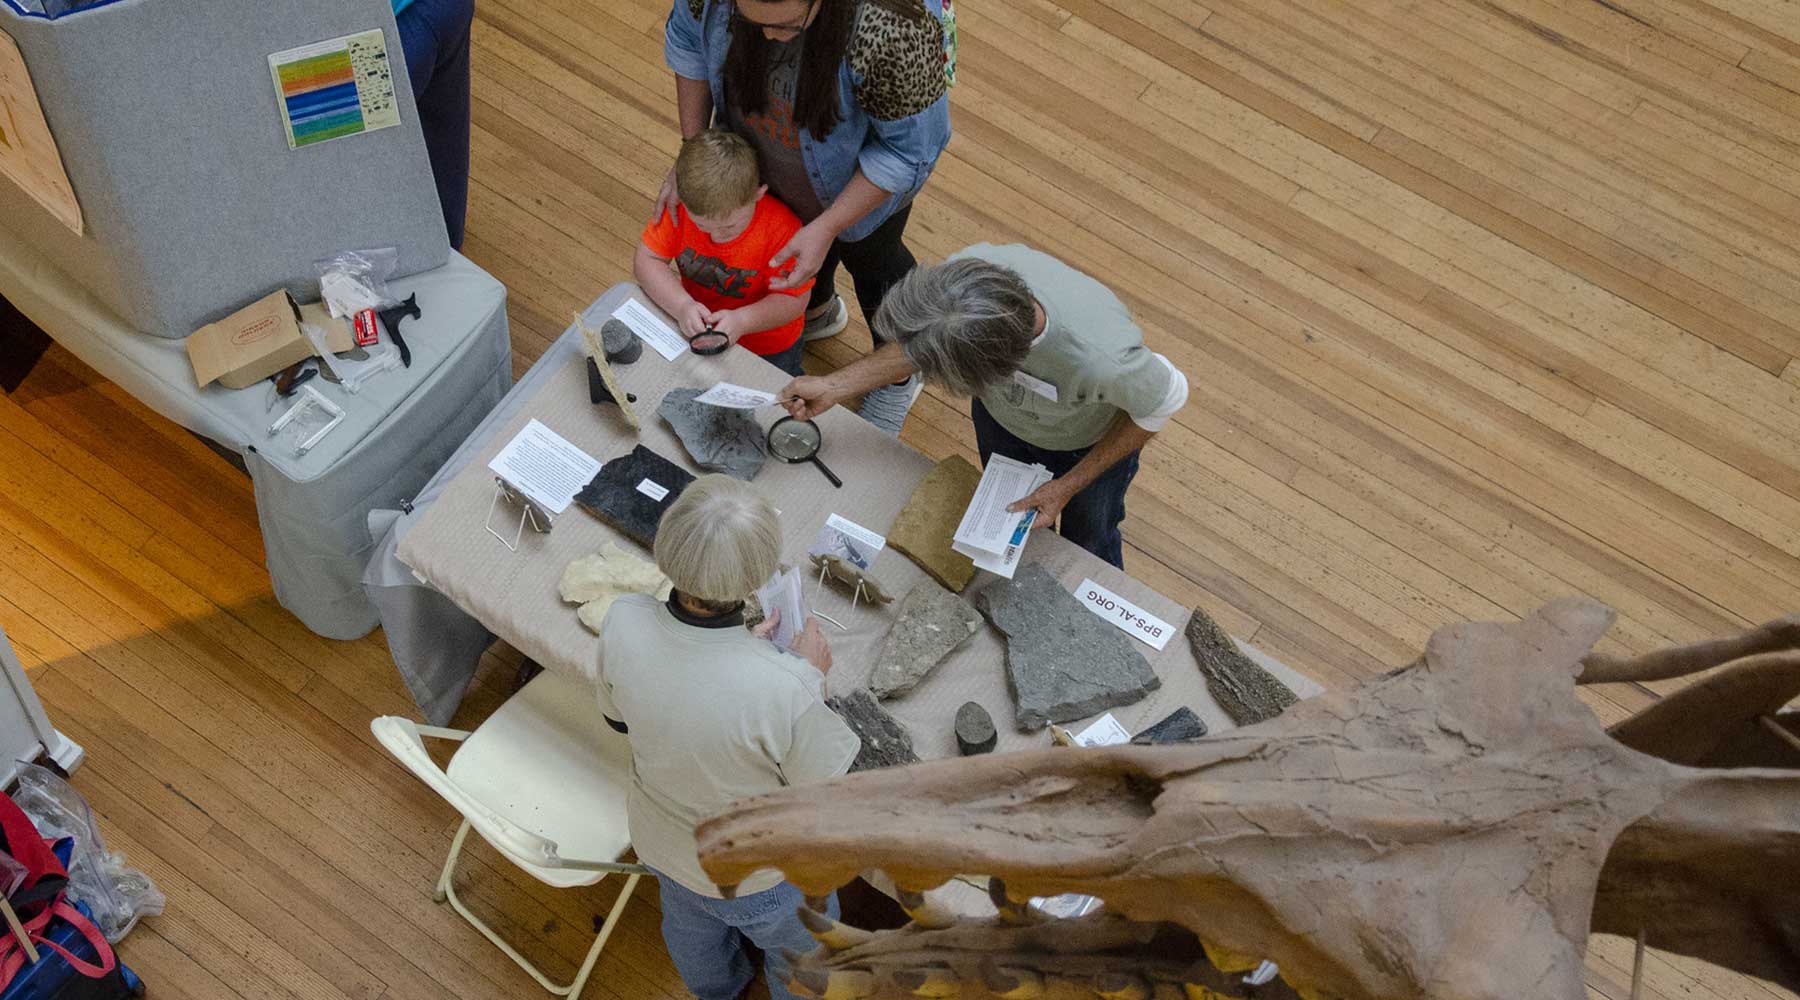 Fossil Day at the Alabama Museum of Natural History